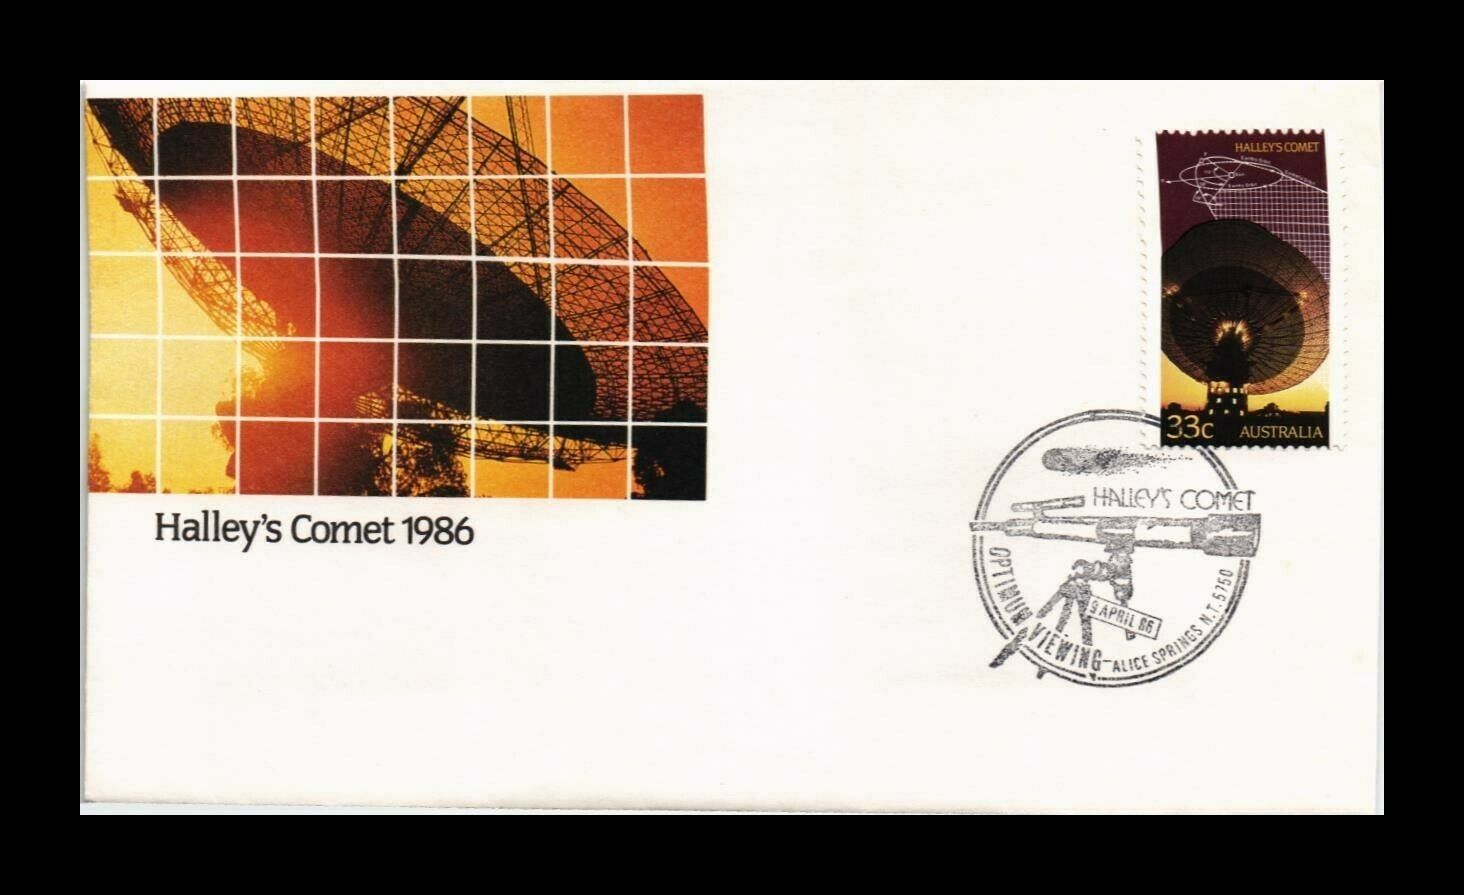 Dr Jim Stamps Halleys Comet First Day Issue Australia Cover